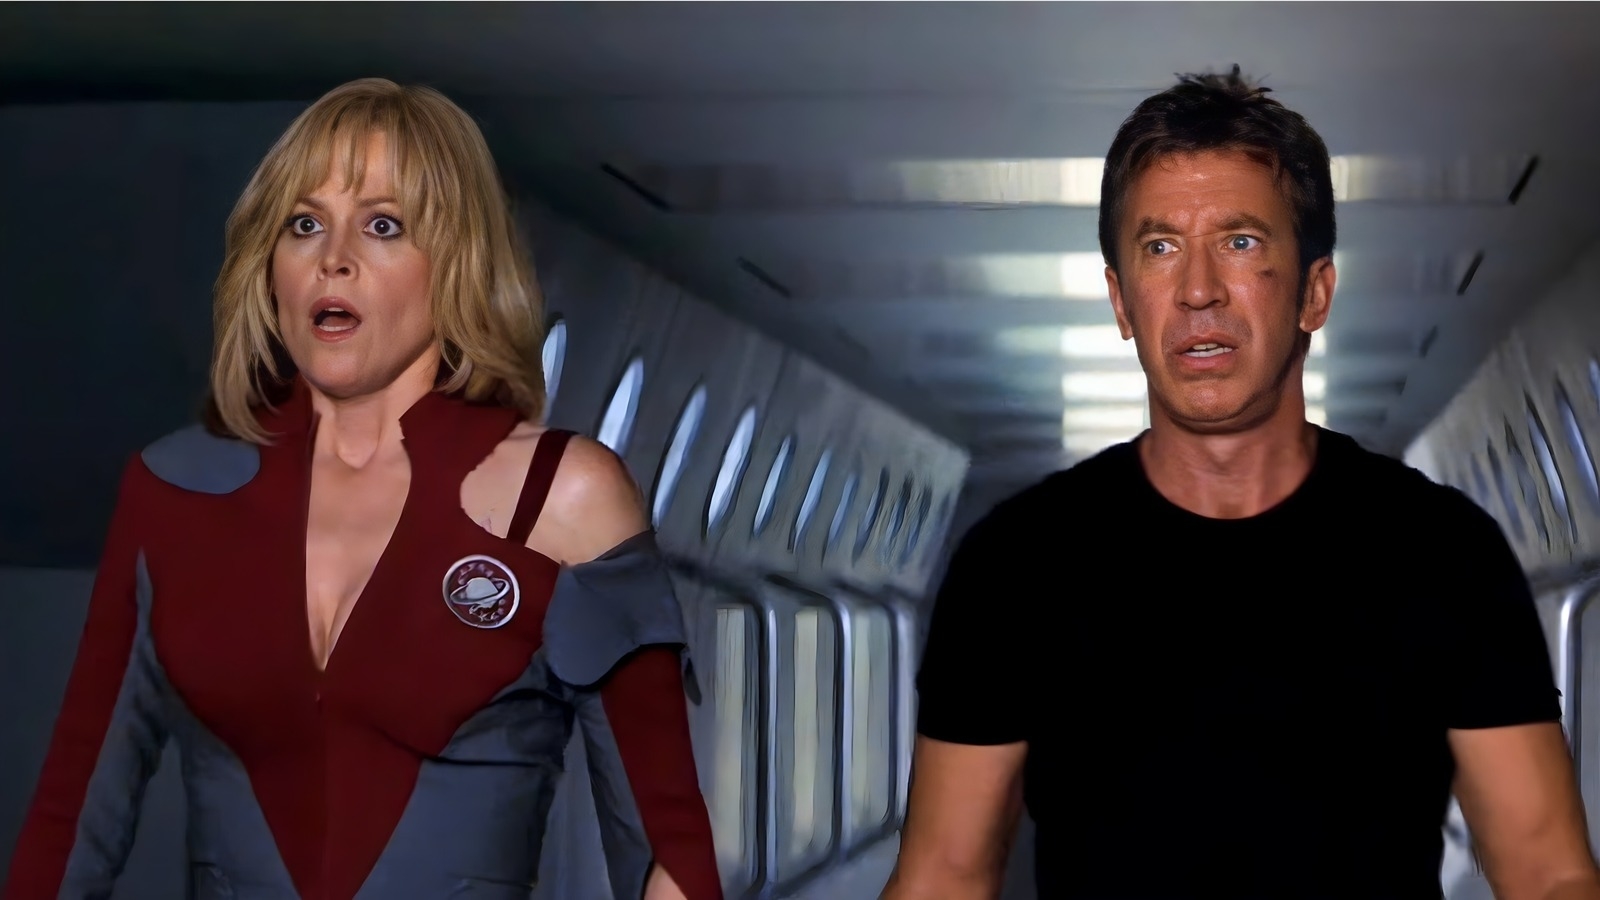 Two characters from the TV show Galaxy Quest, Gwen DeMarco and Jason Nesmith, looking surprised